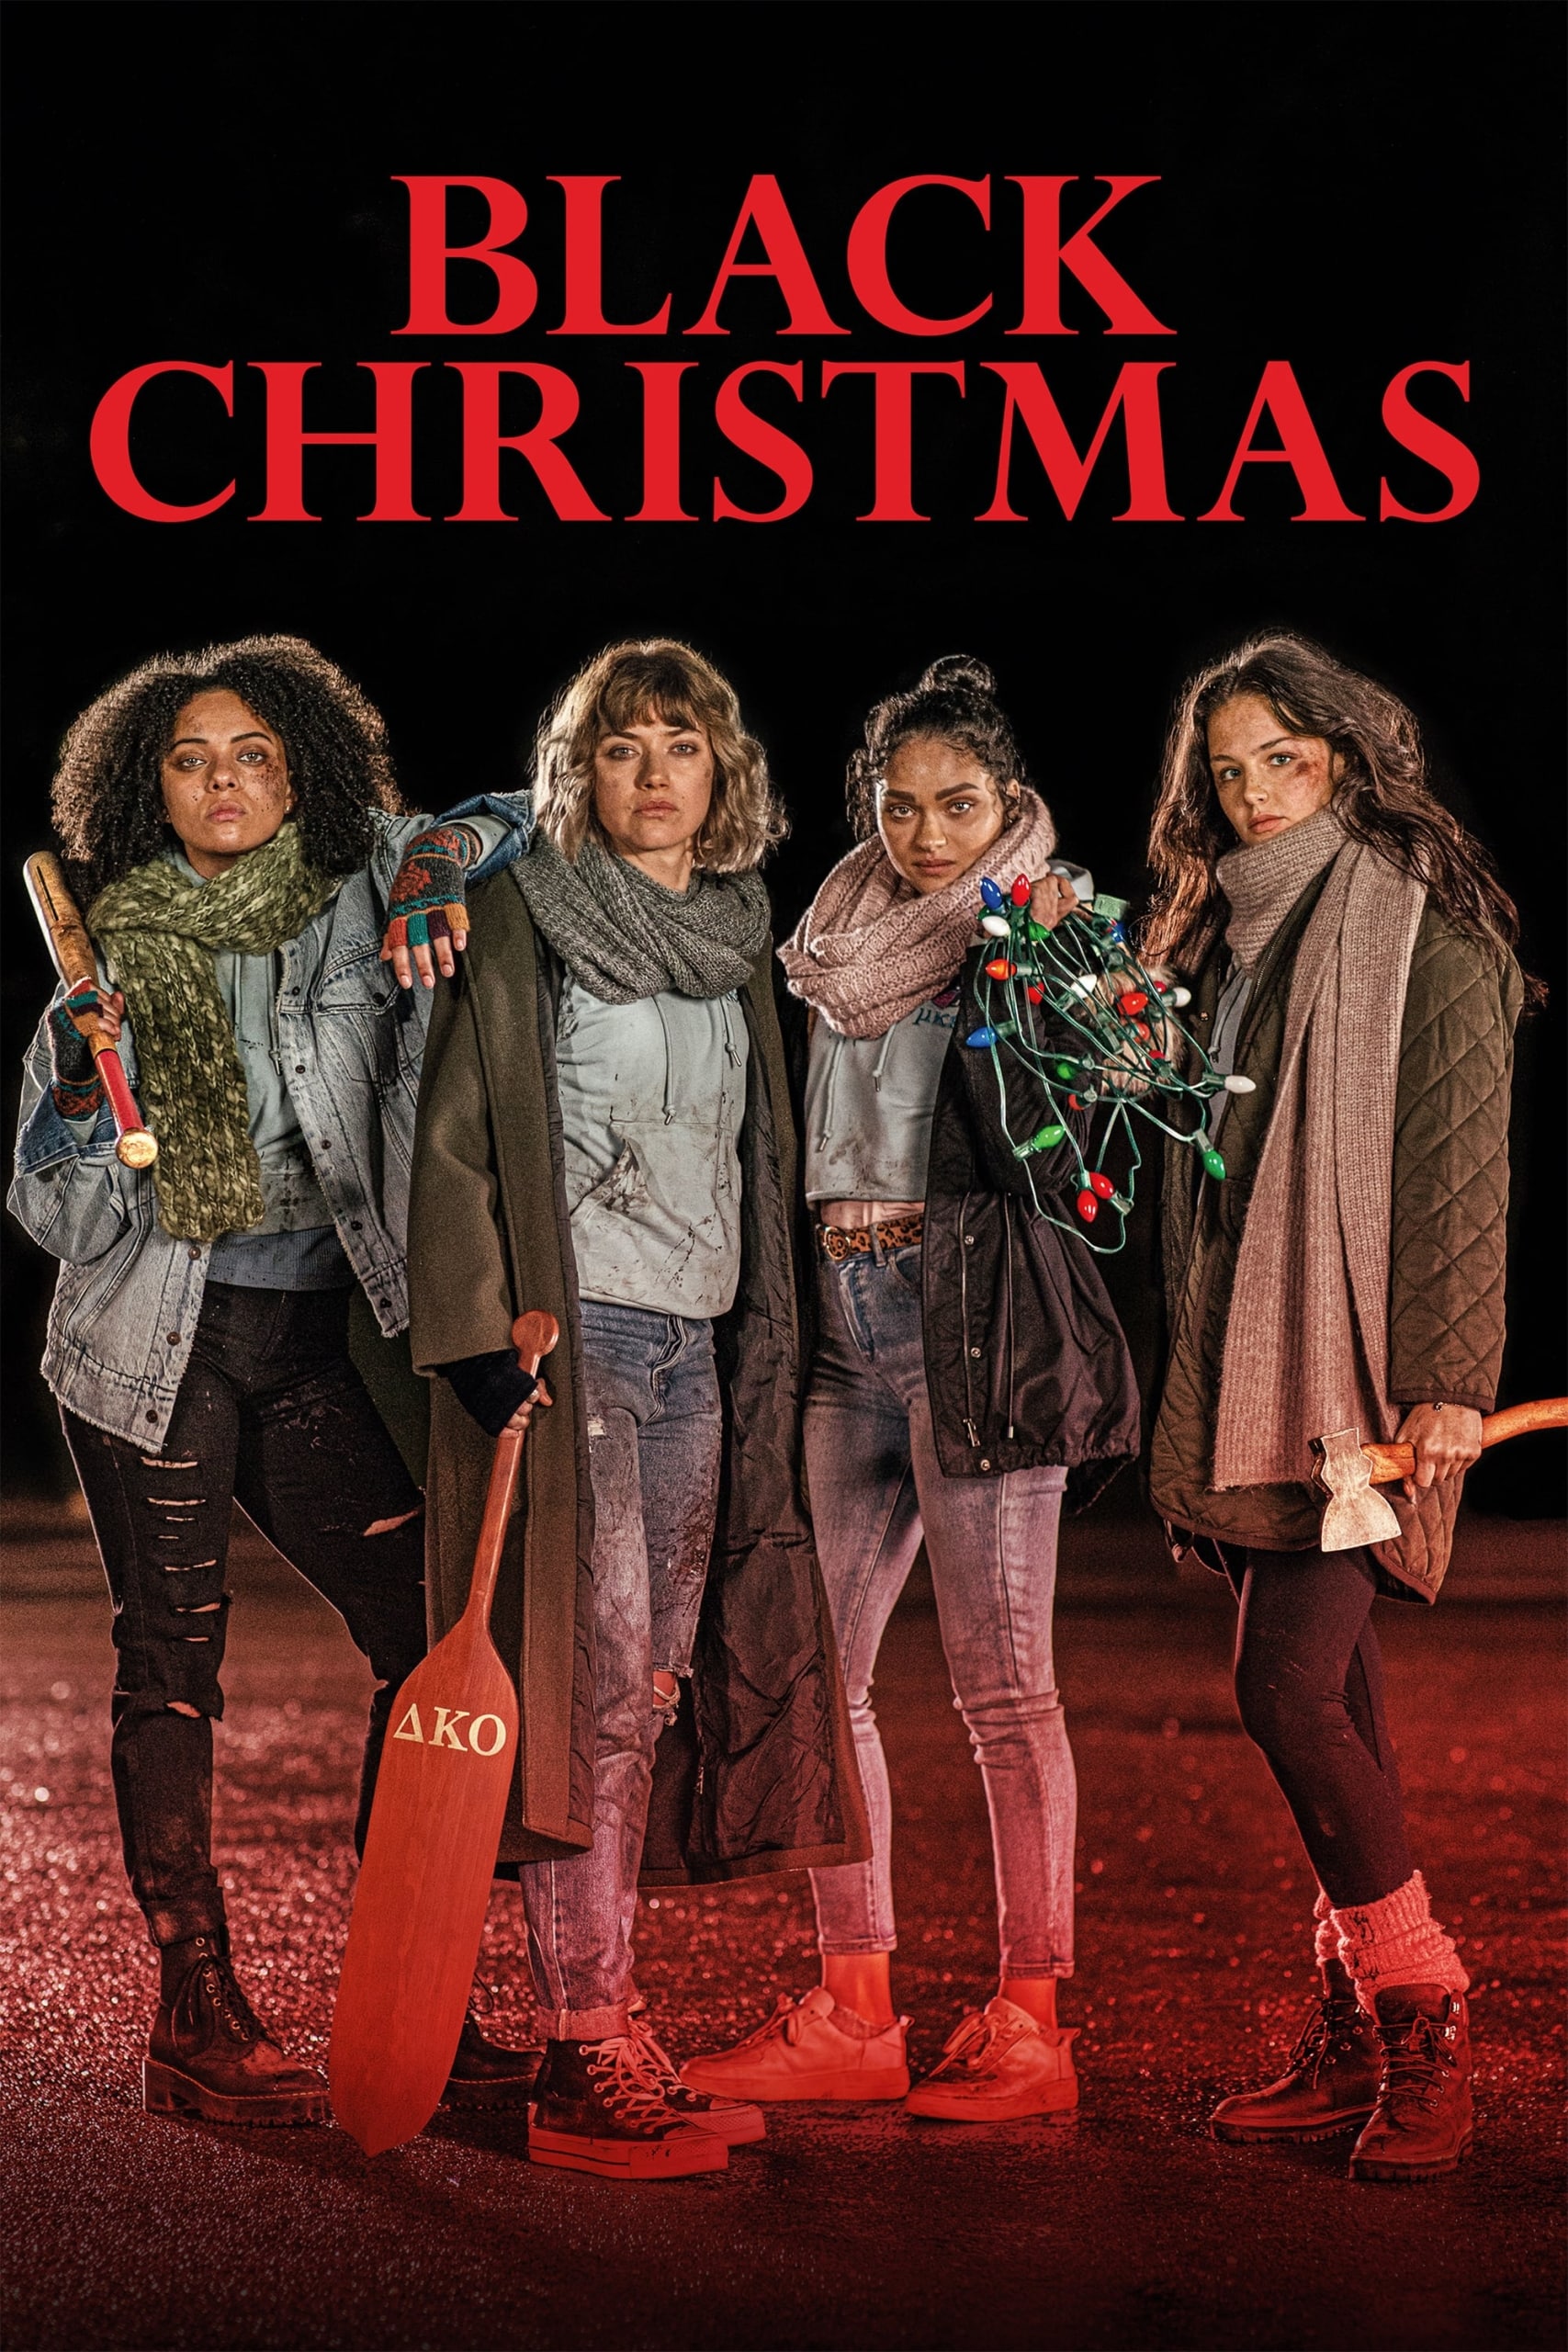 Poster for the movie "Black Christmas"